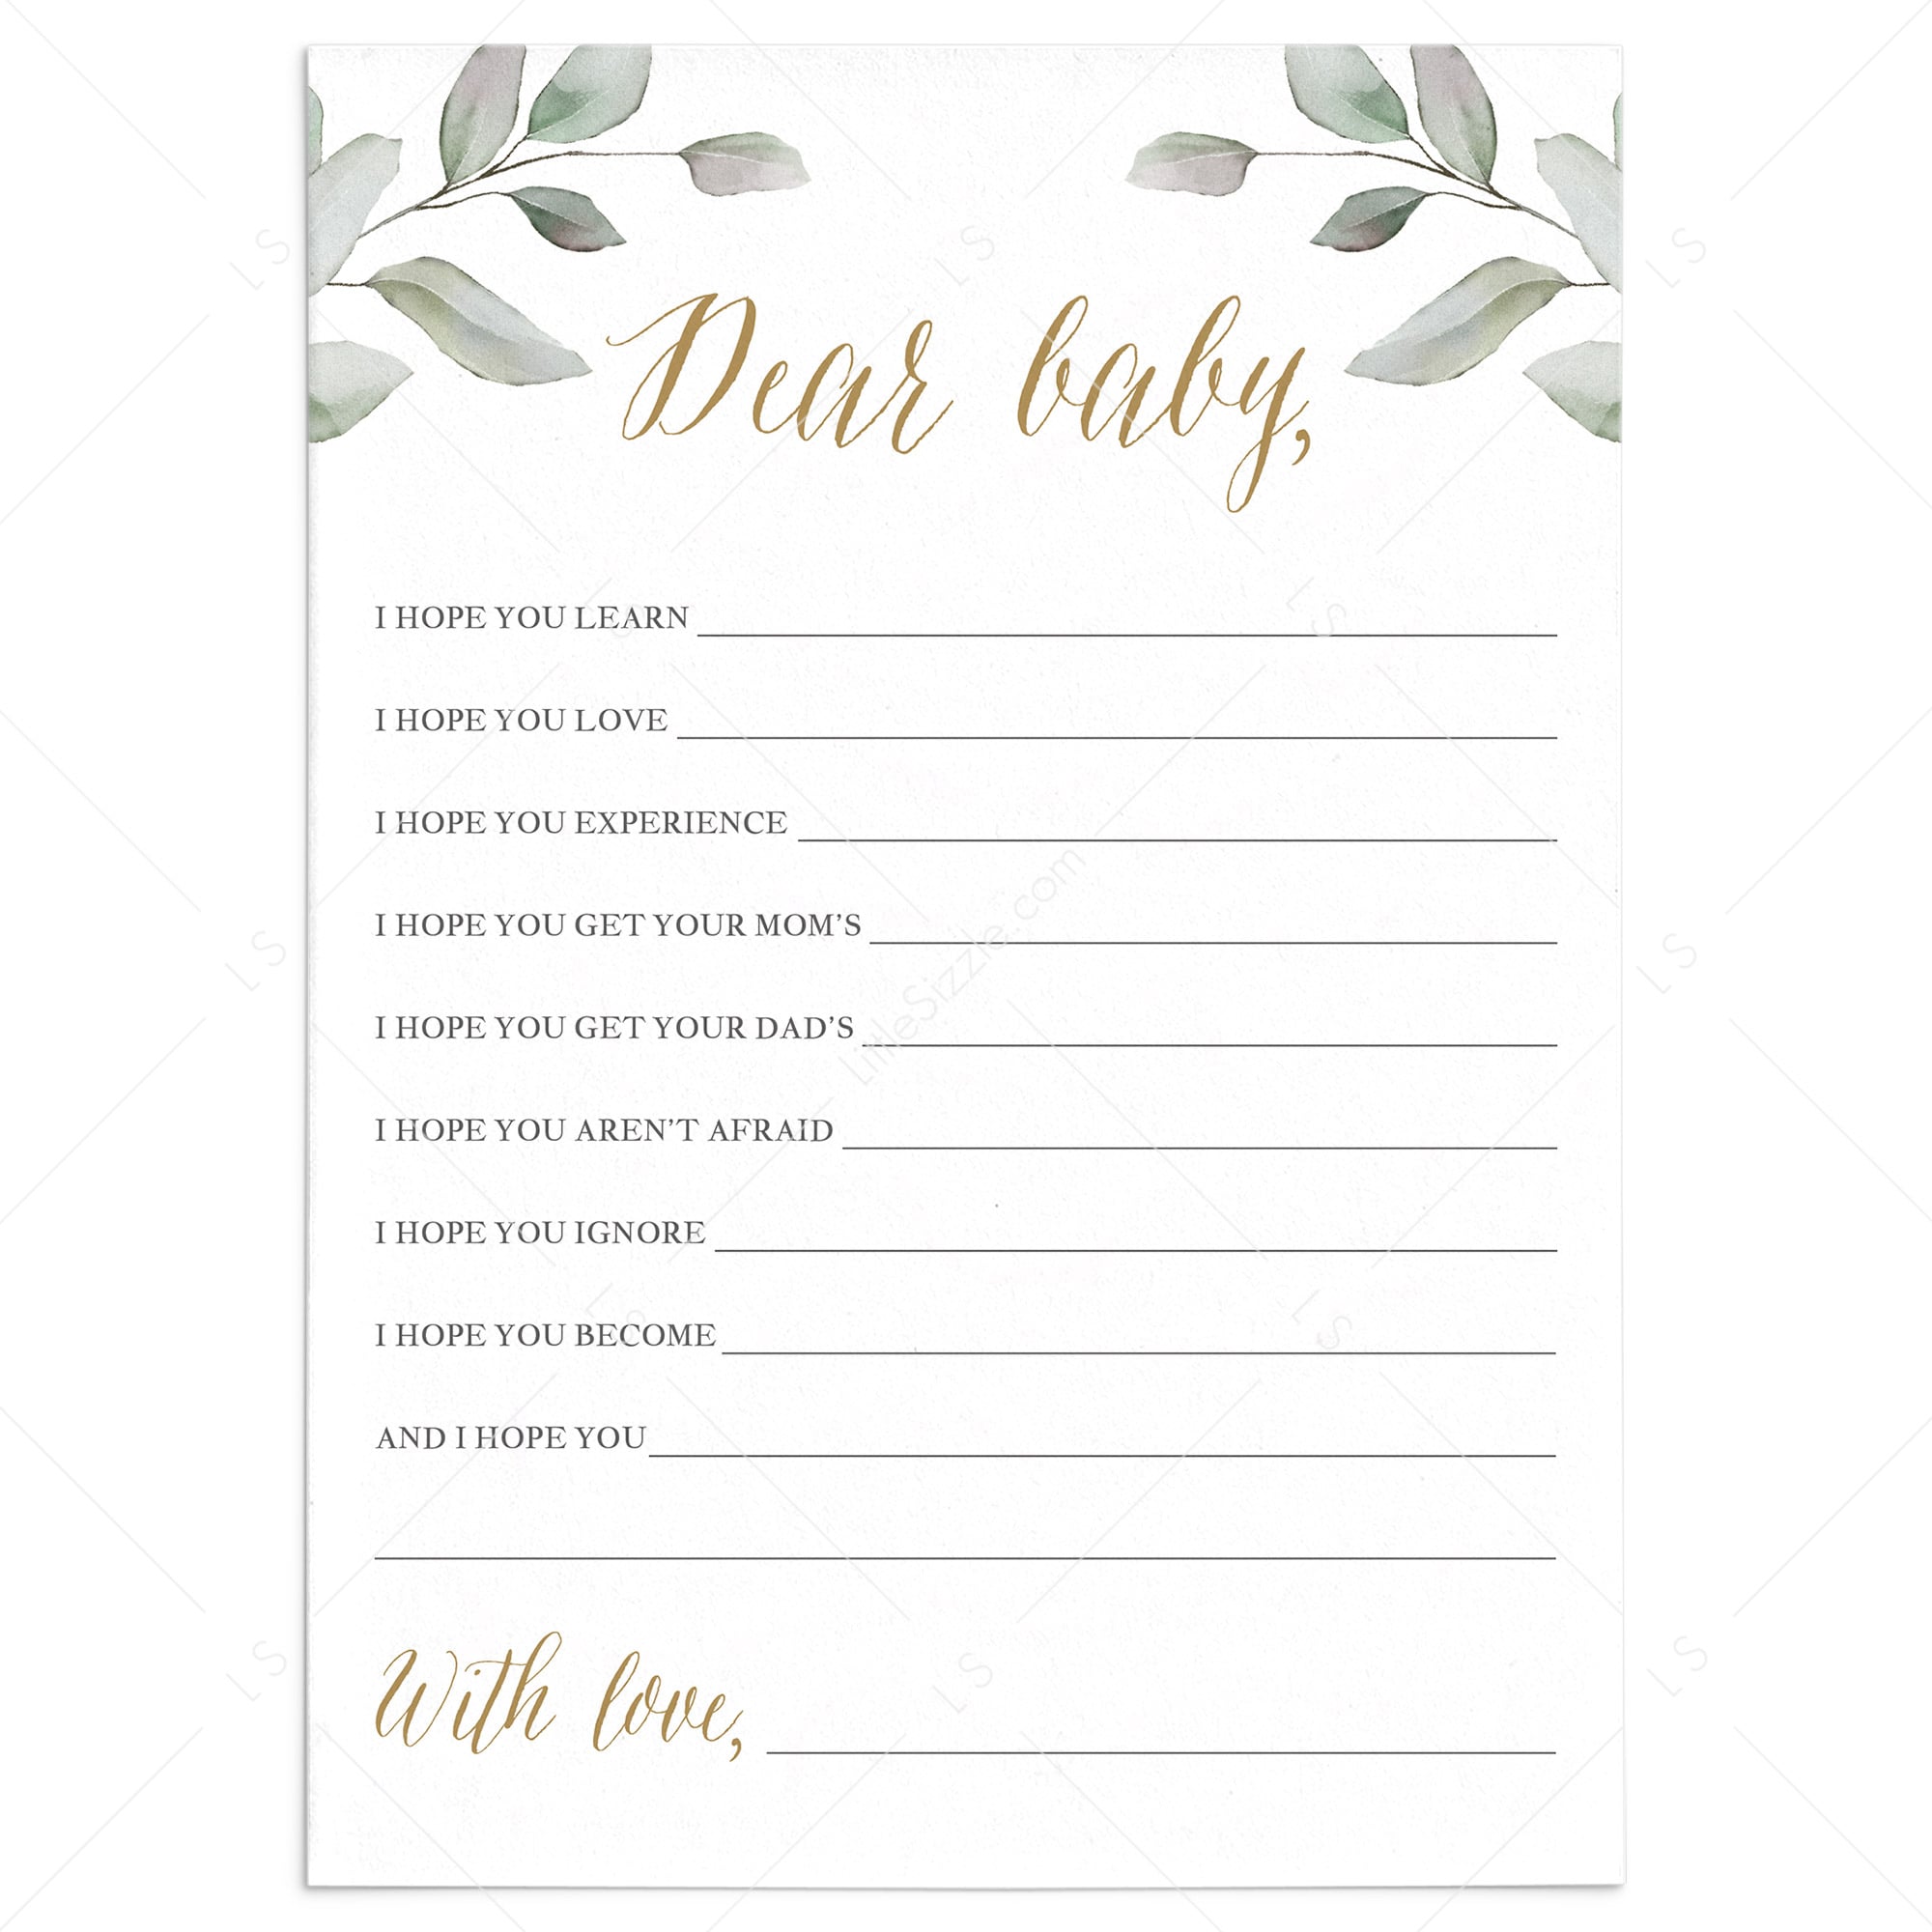 Greenery and gold baby shower dear baby wishes card by LittleSizzle